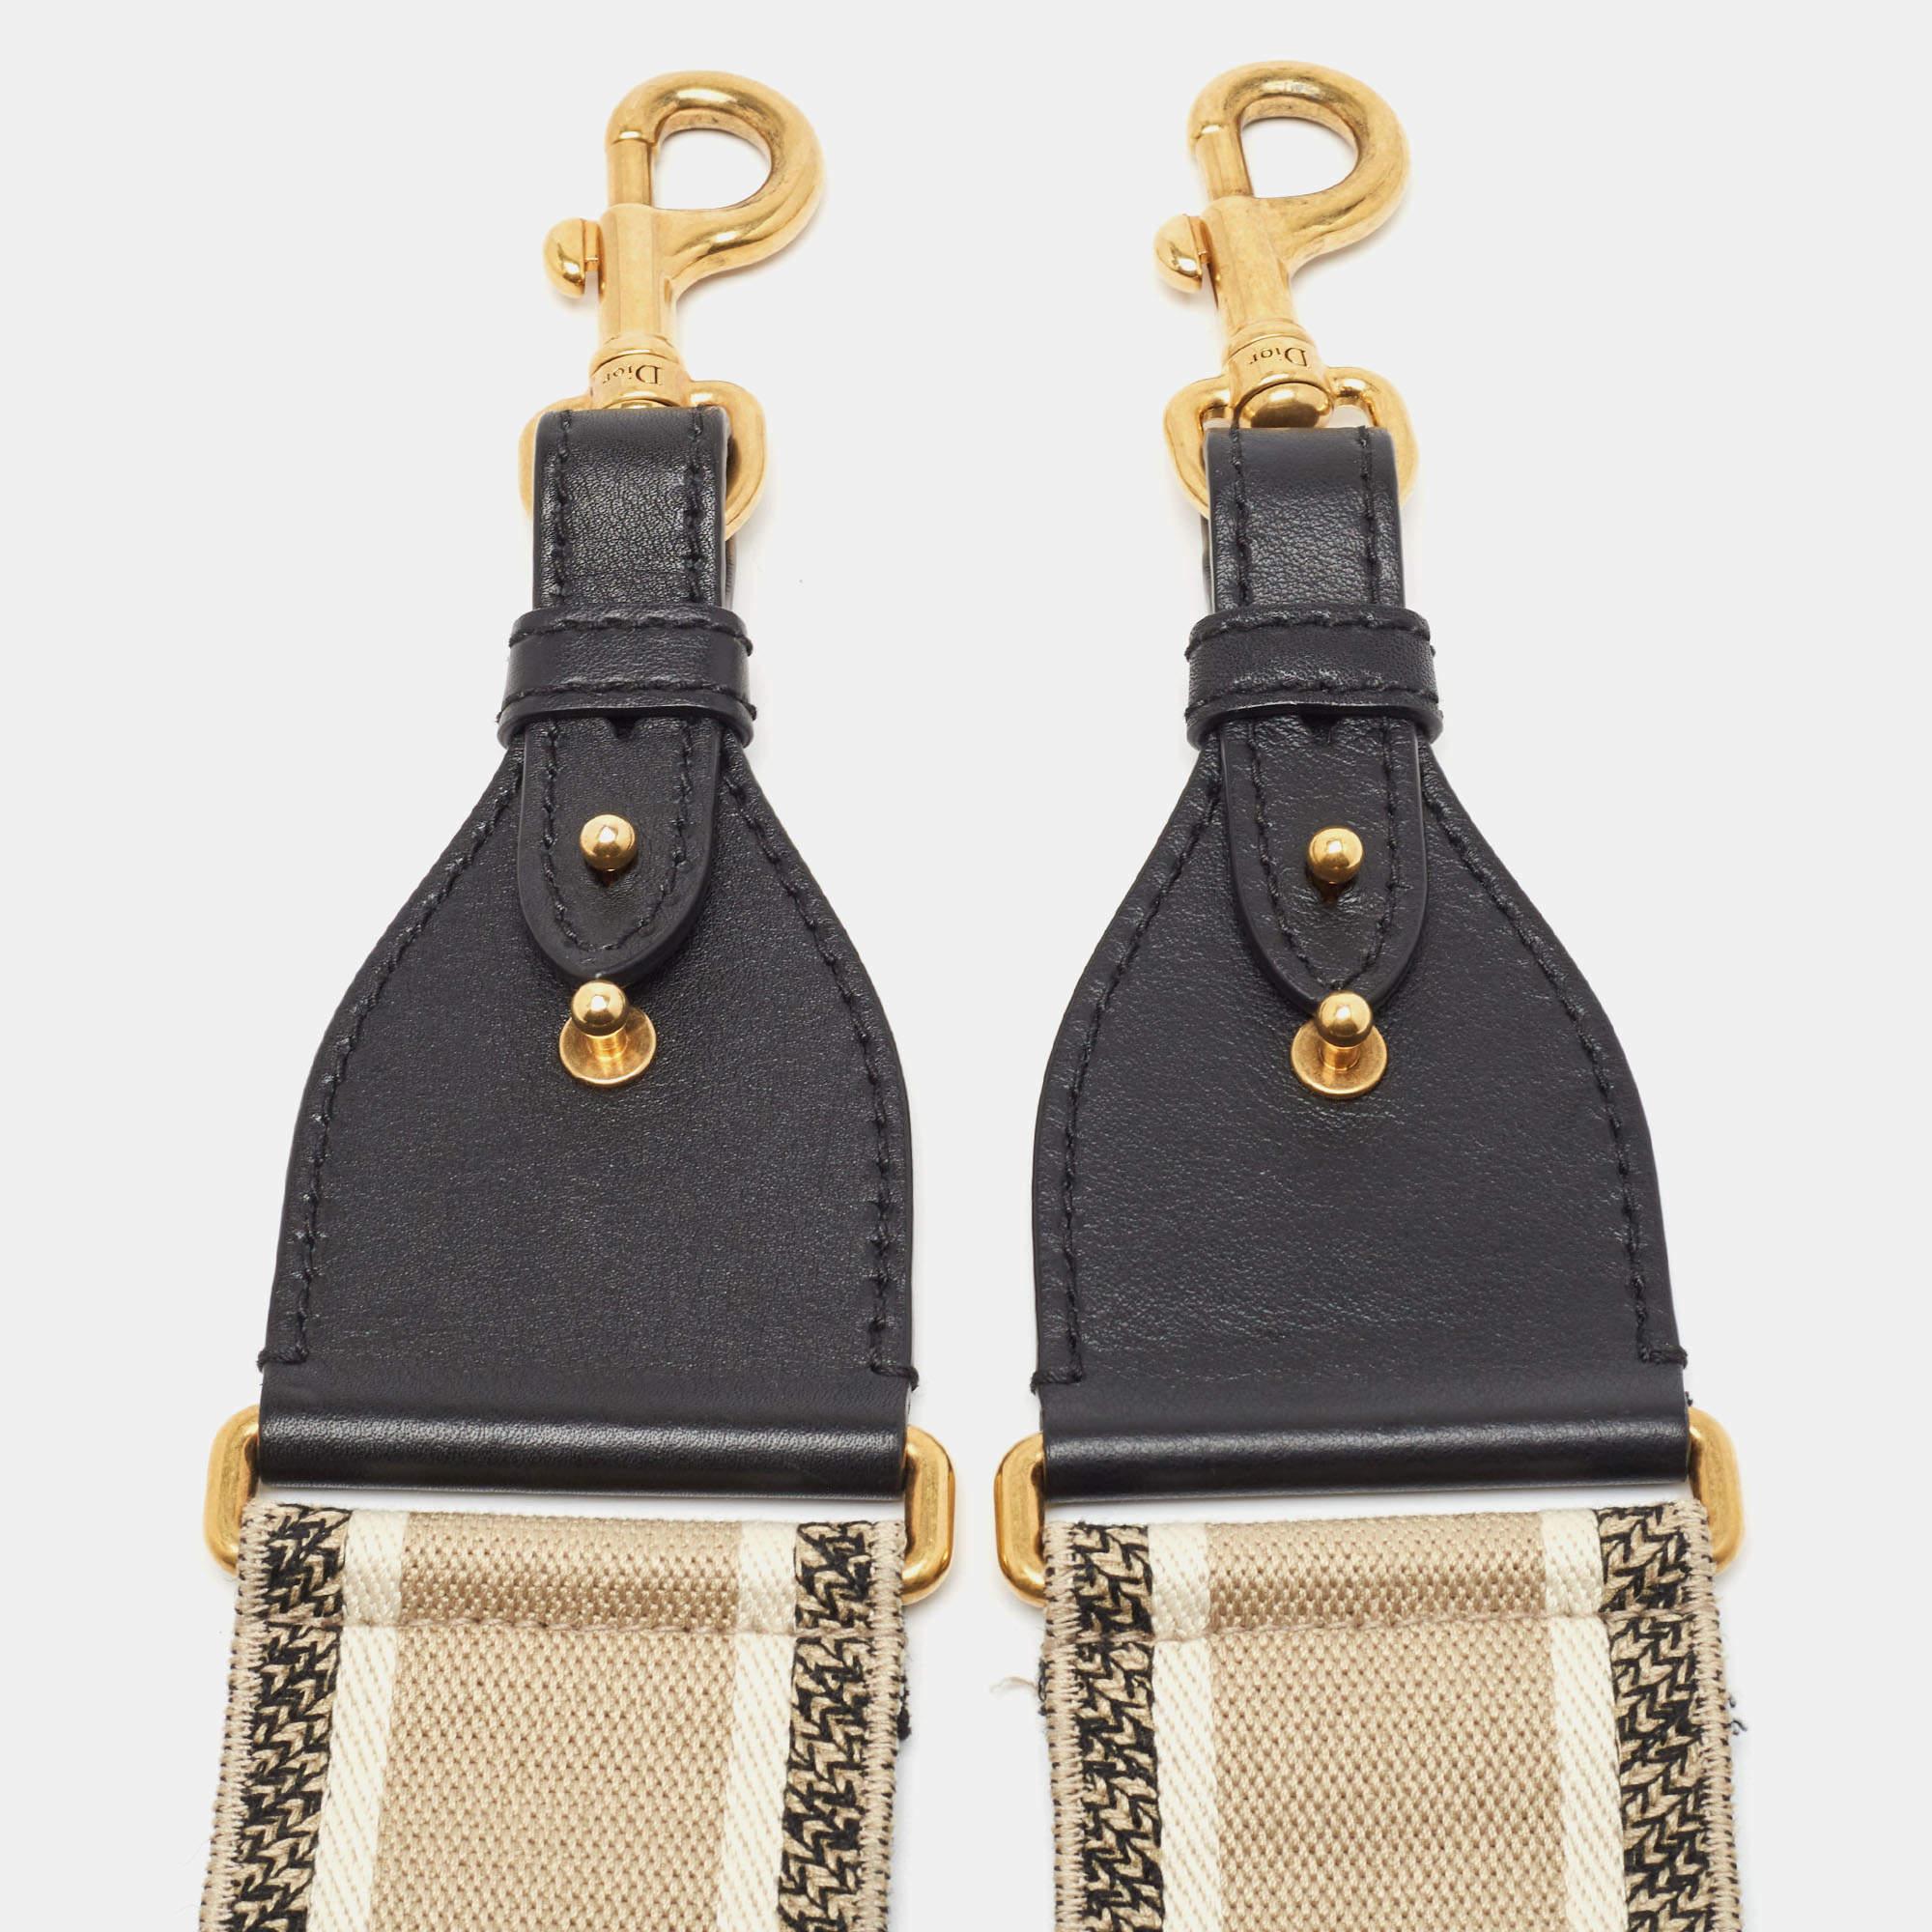 Dior brings you this super-chic shoulder strap that you can flaunt with your great collection of handbags. The strap is made from embroidered canvas and leather trims. It is complete with two metal clasps for you to attach the strap to your bags.

